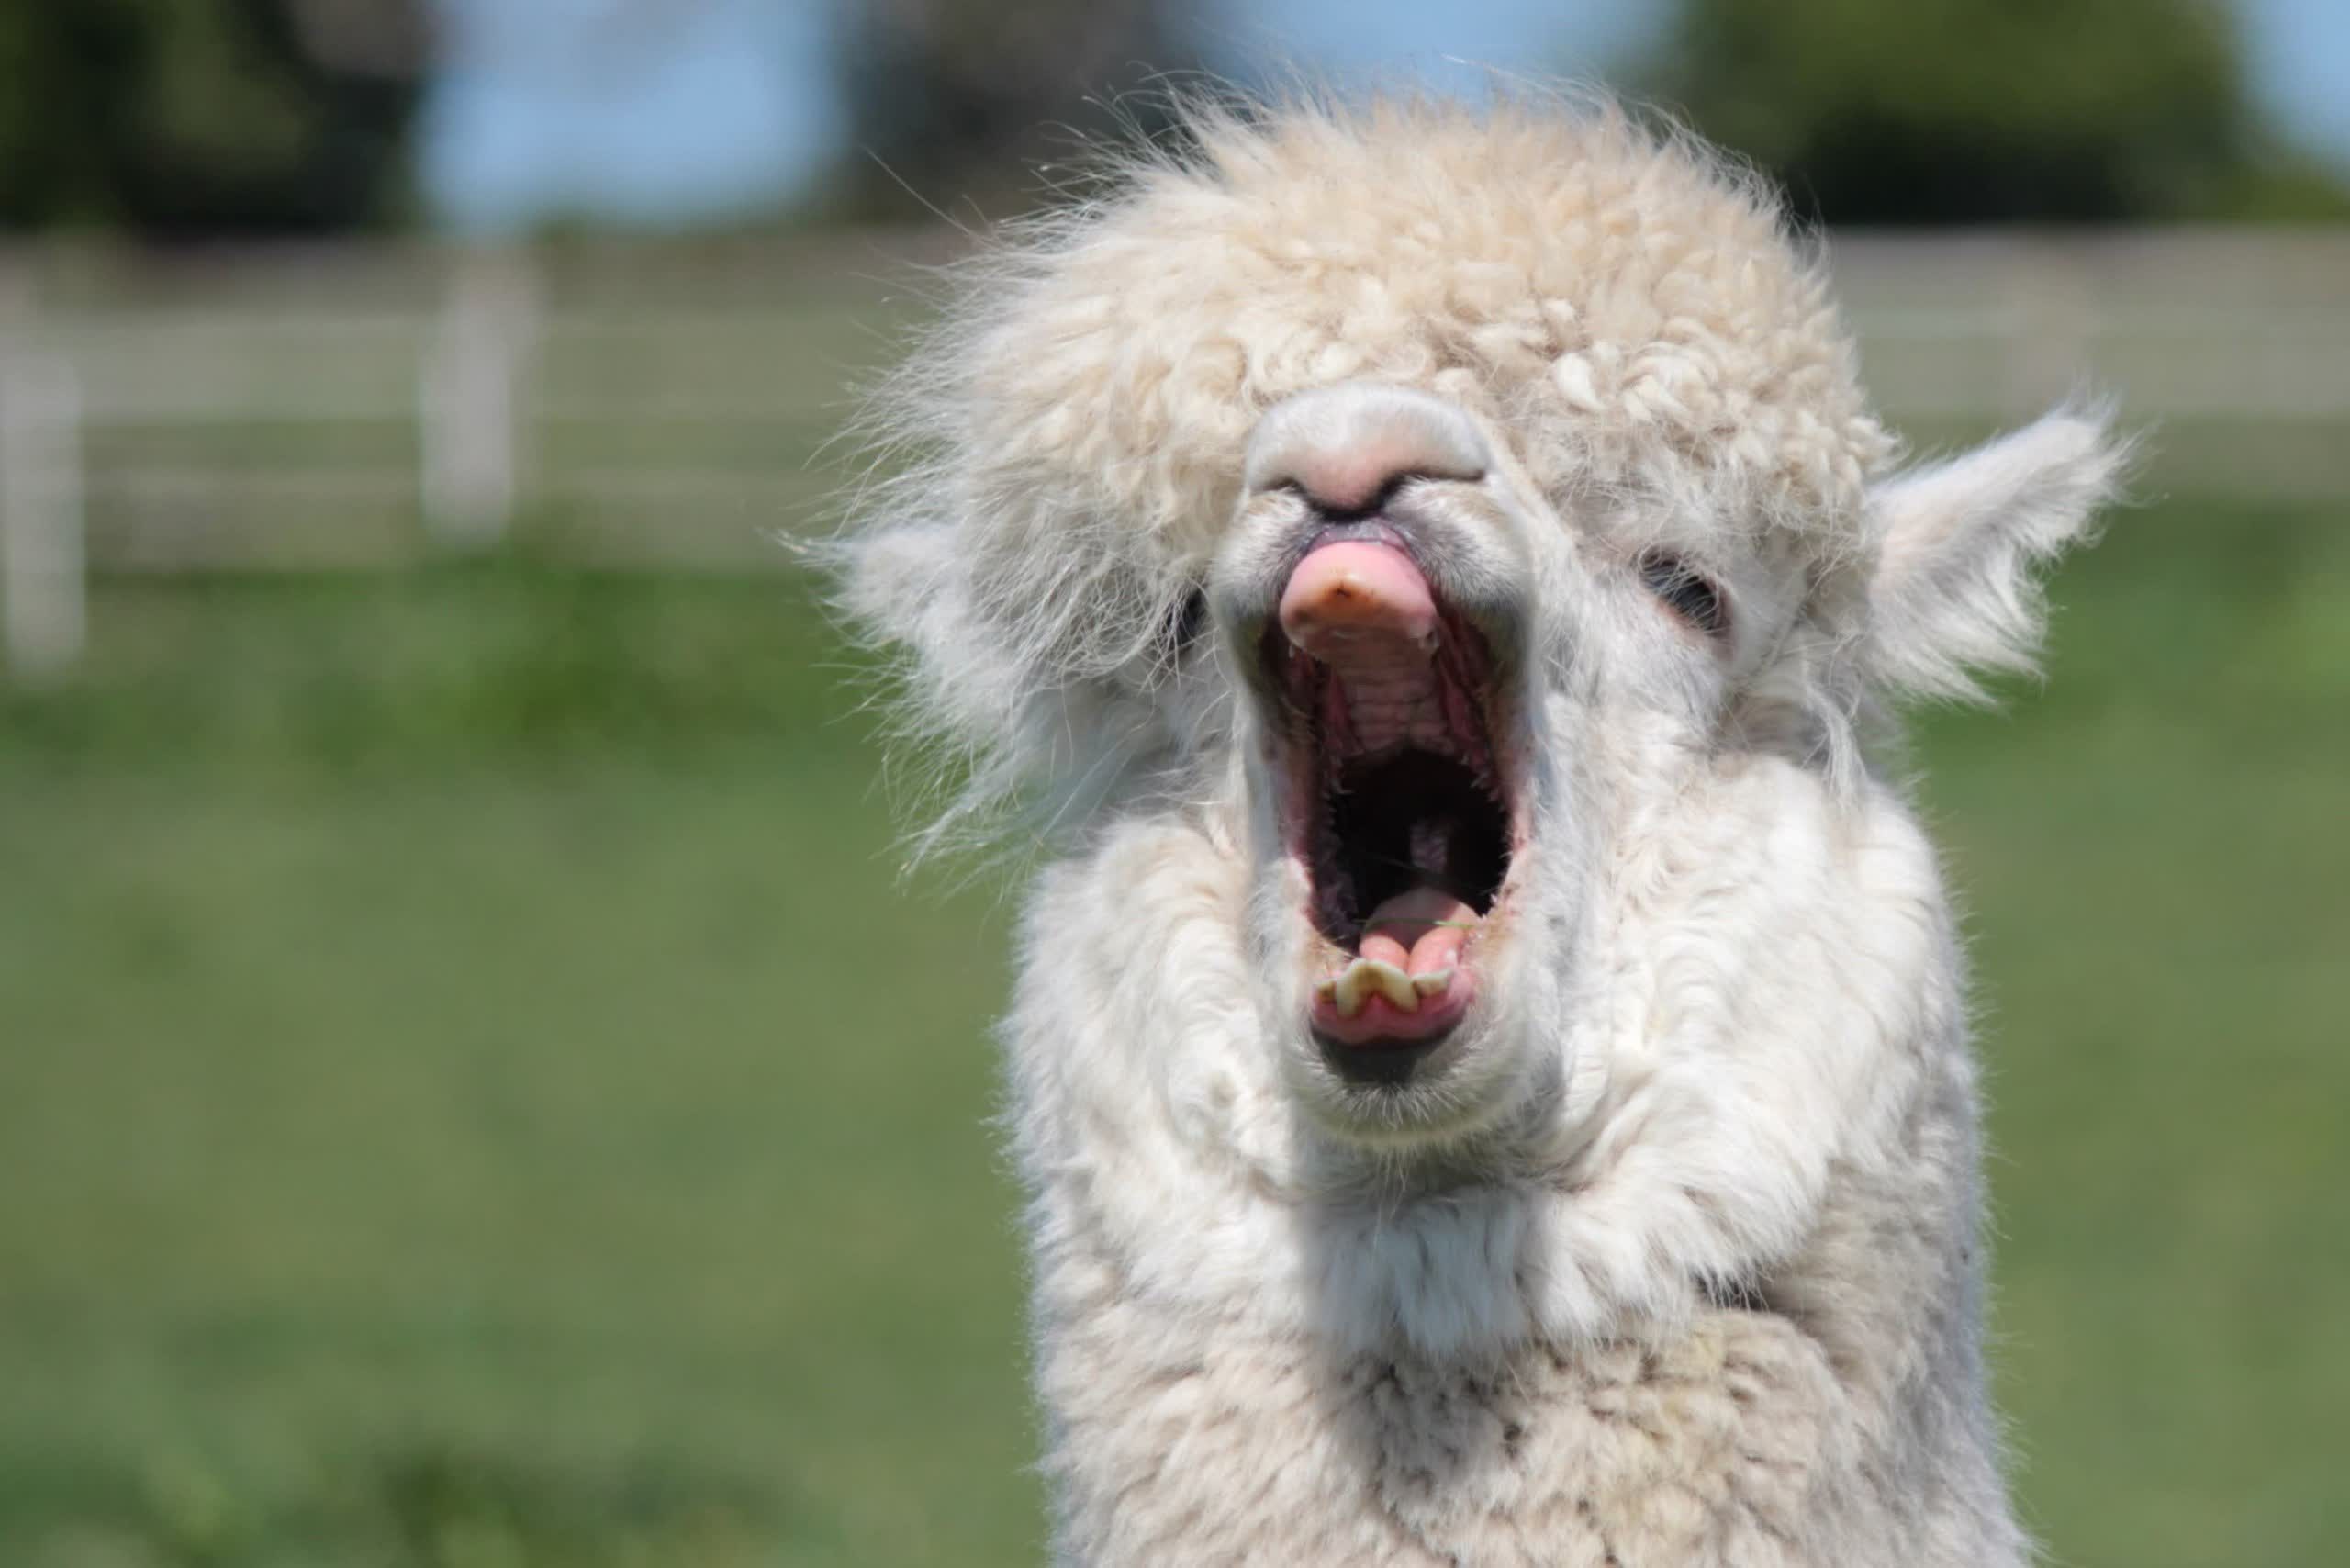 Stanford pulls Alpaca chatbot citing hallucinations, costs, and safety concerns